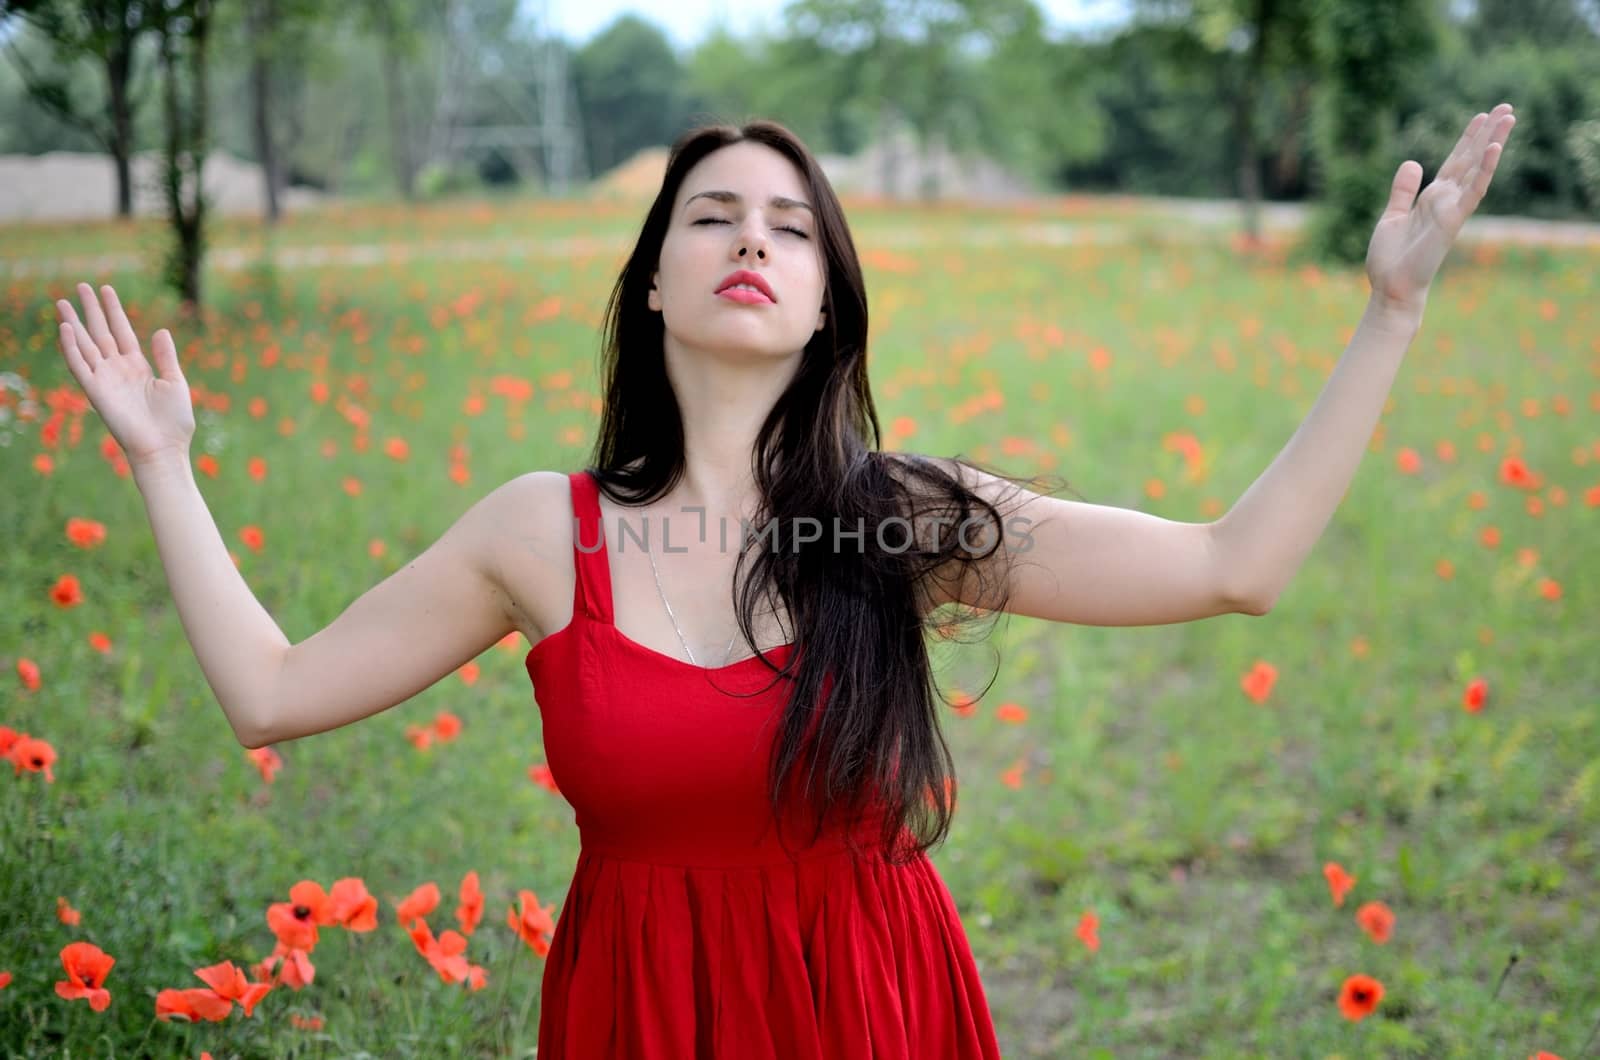 Female model with red dress. Girl meditating in open field, meadow with poppies in background. Model with closed eyes and open arms.